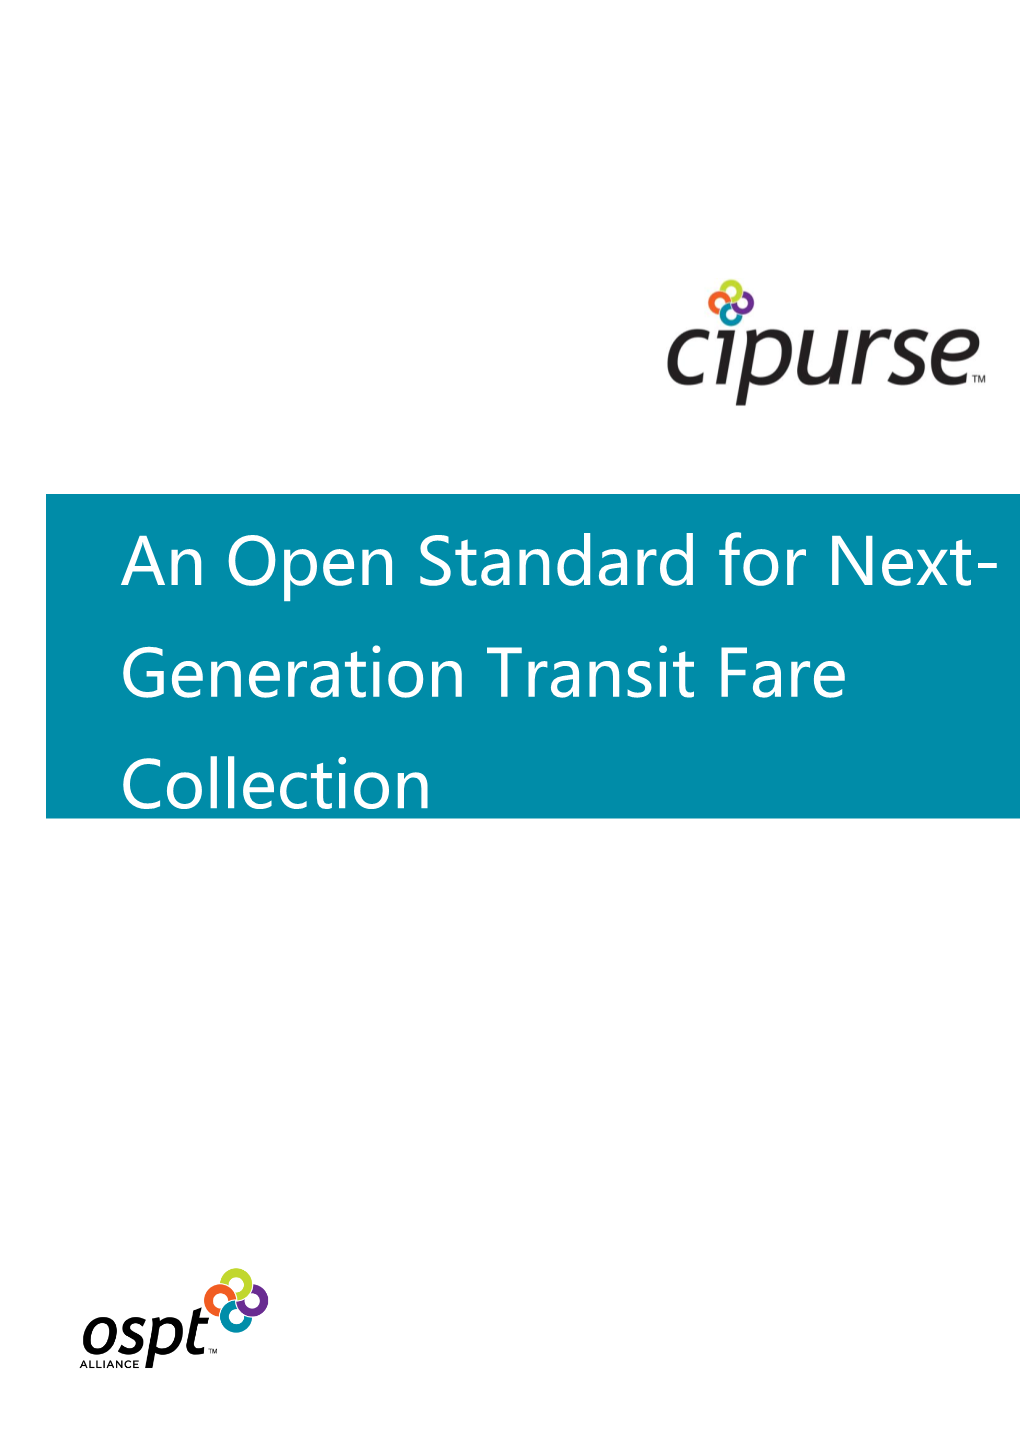 An Open Standard for Next- Generation Transit Fare Collection